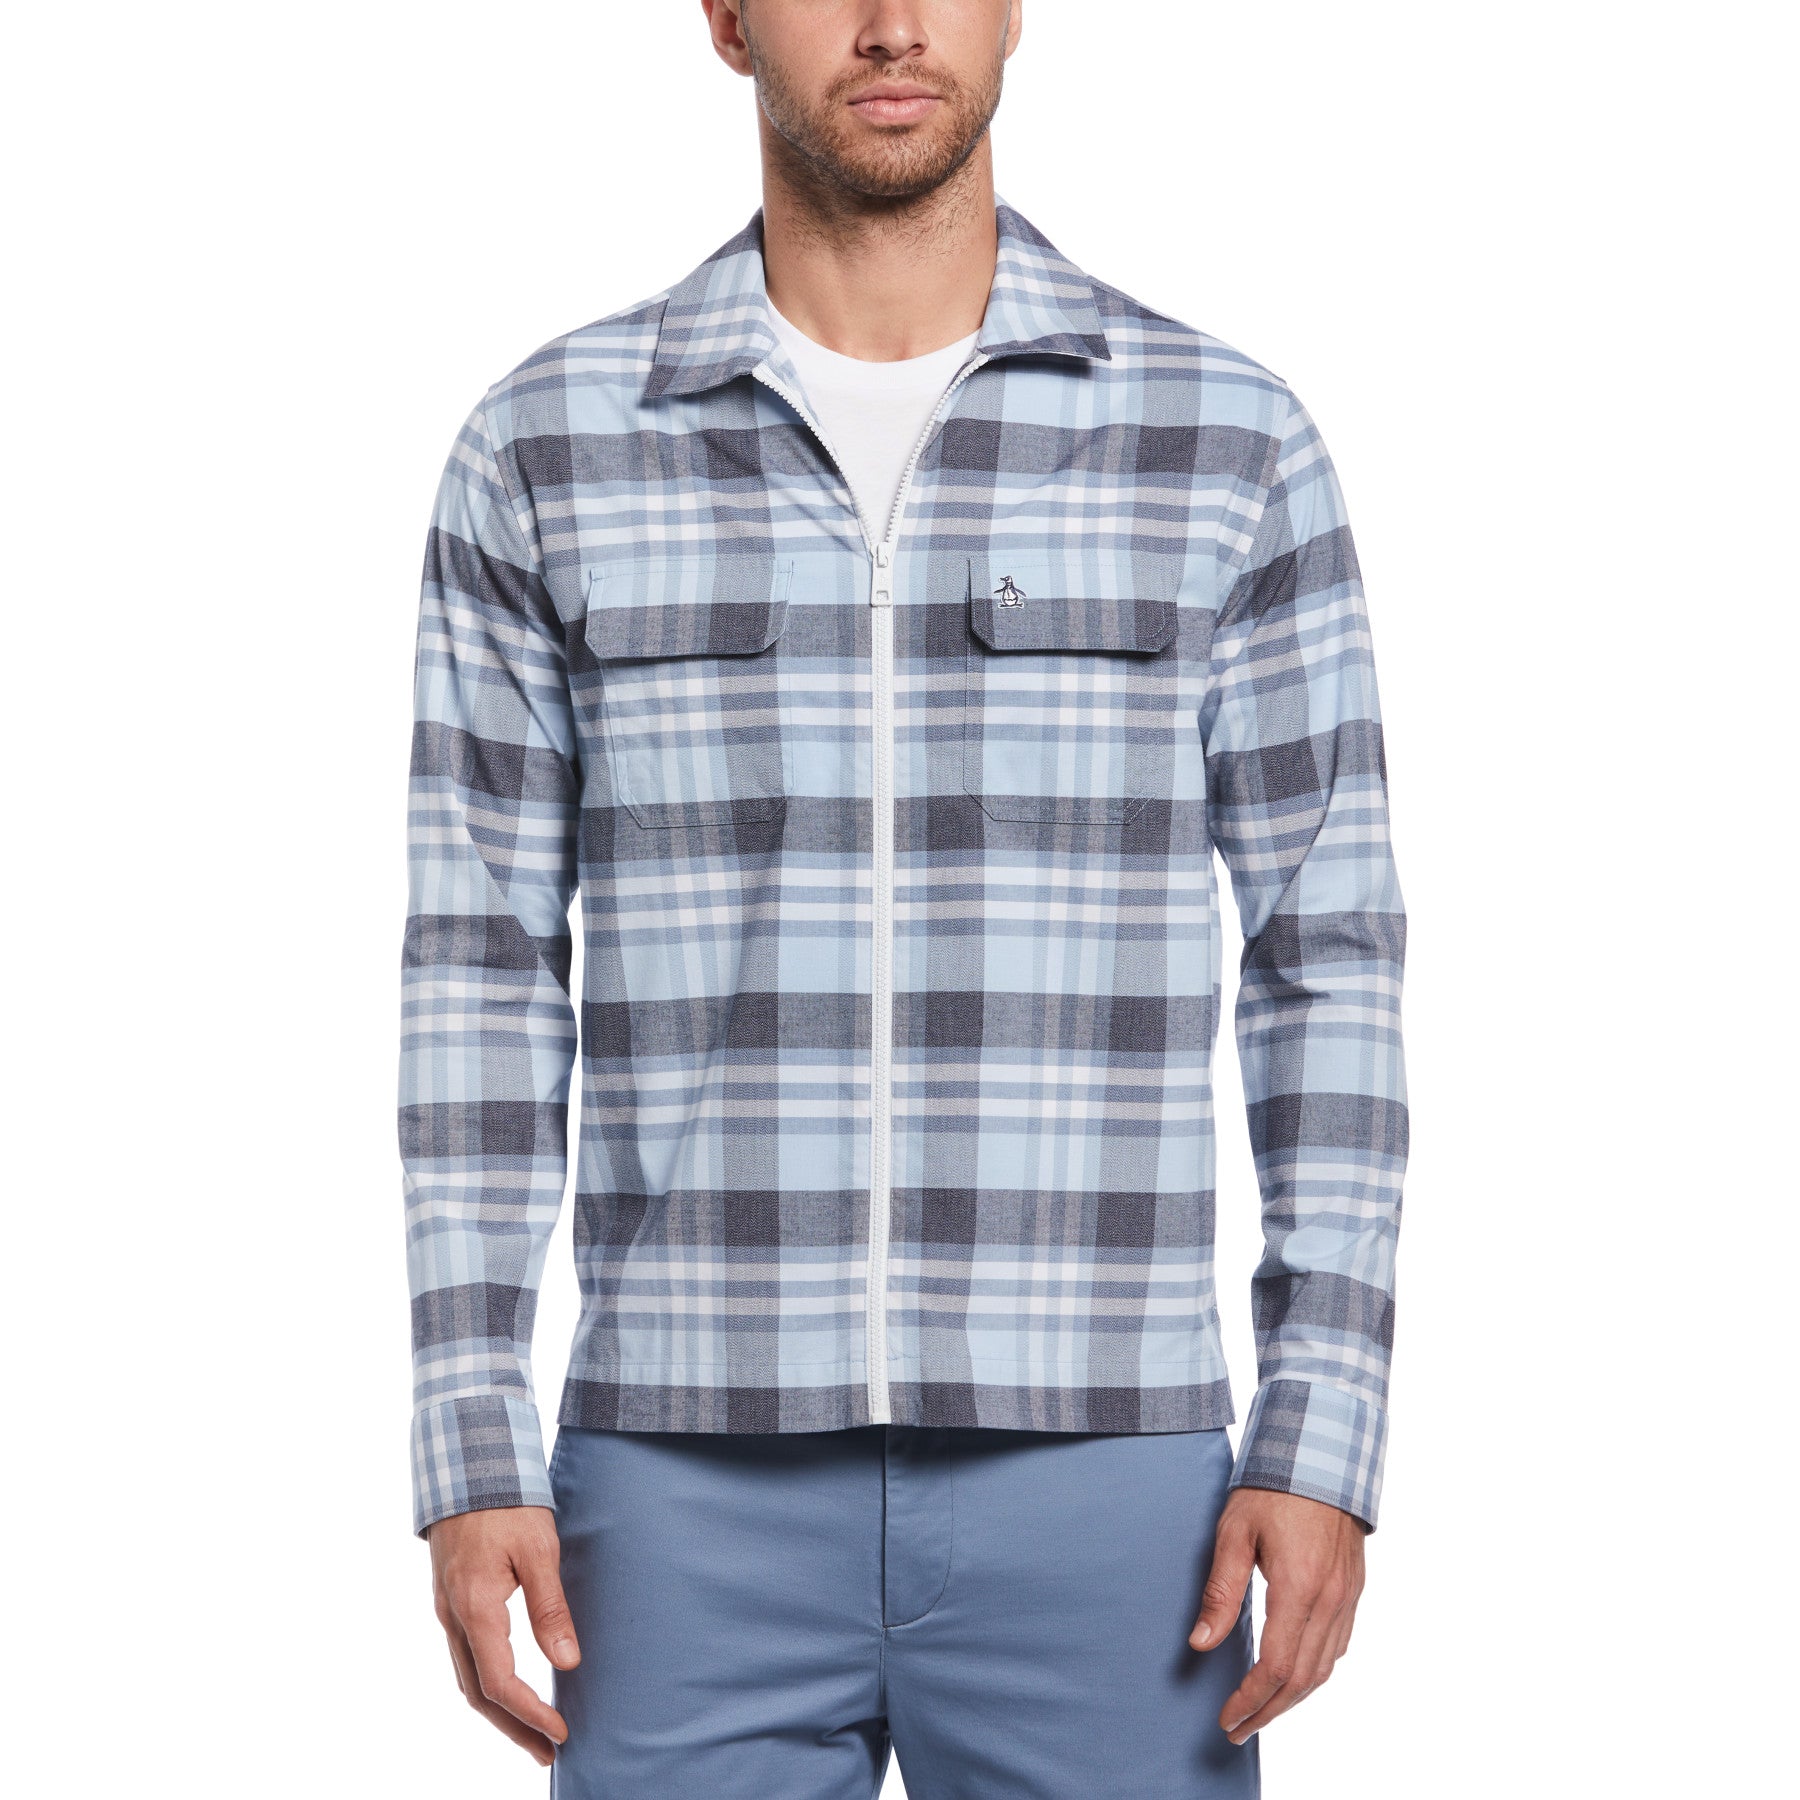 View Premium Ecovero And Cotton Plaid Stretch Shirt With Zip In Cerulean information